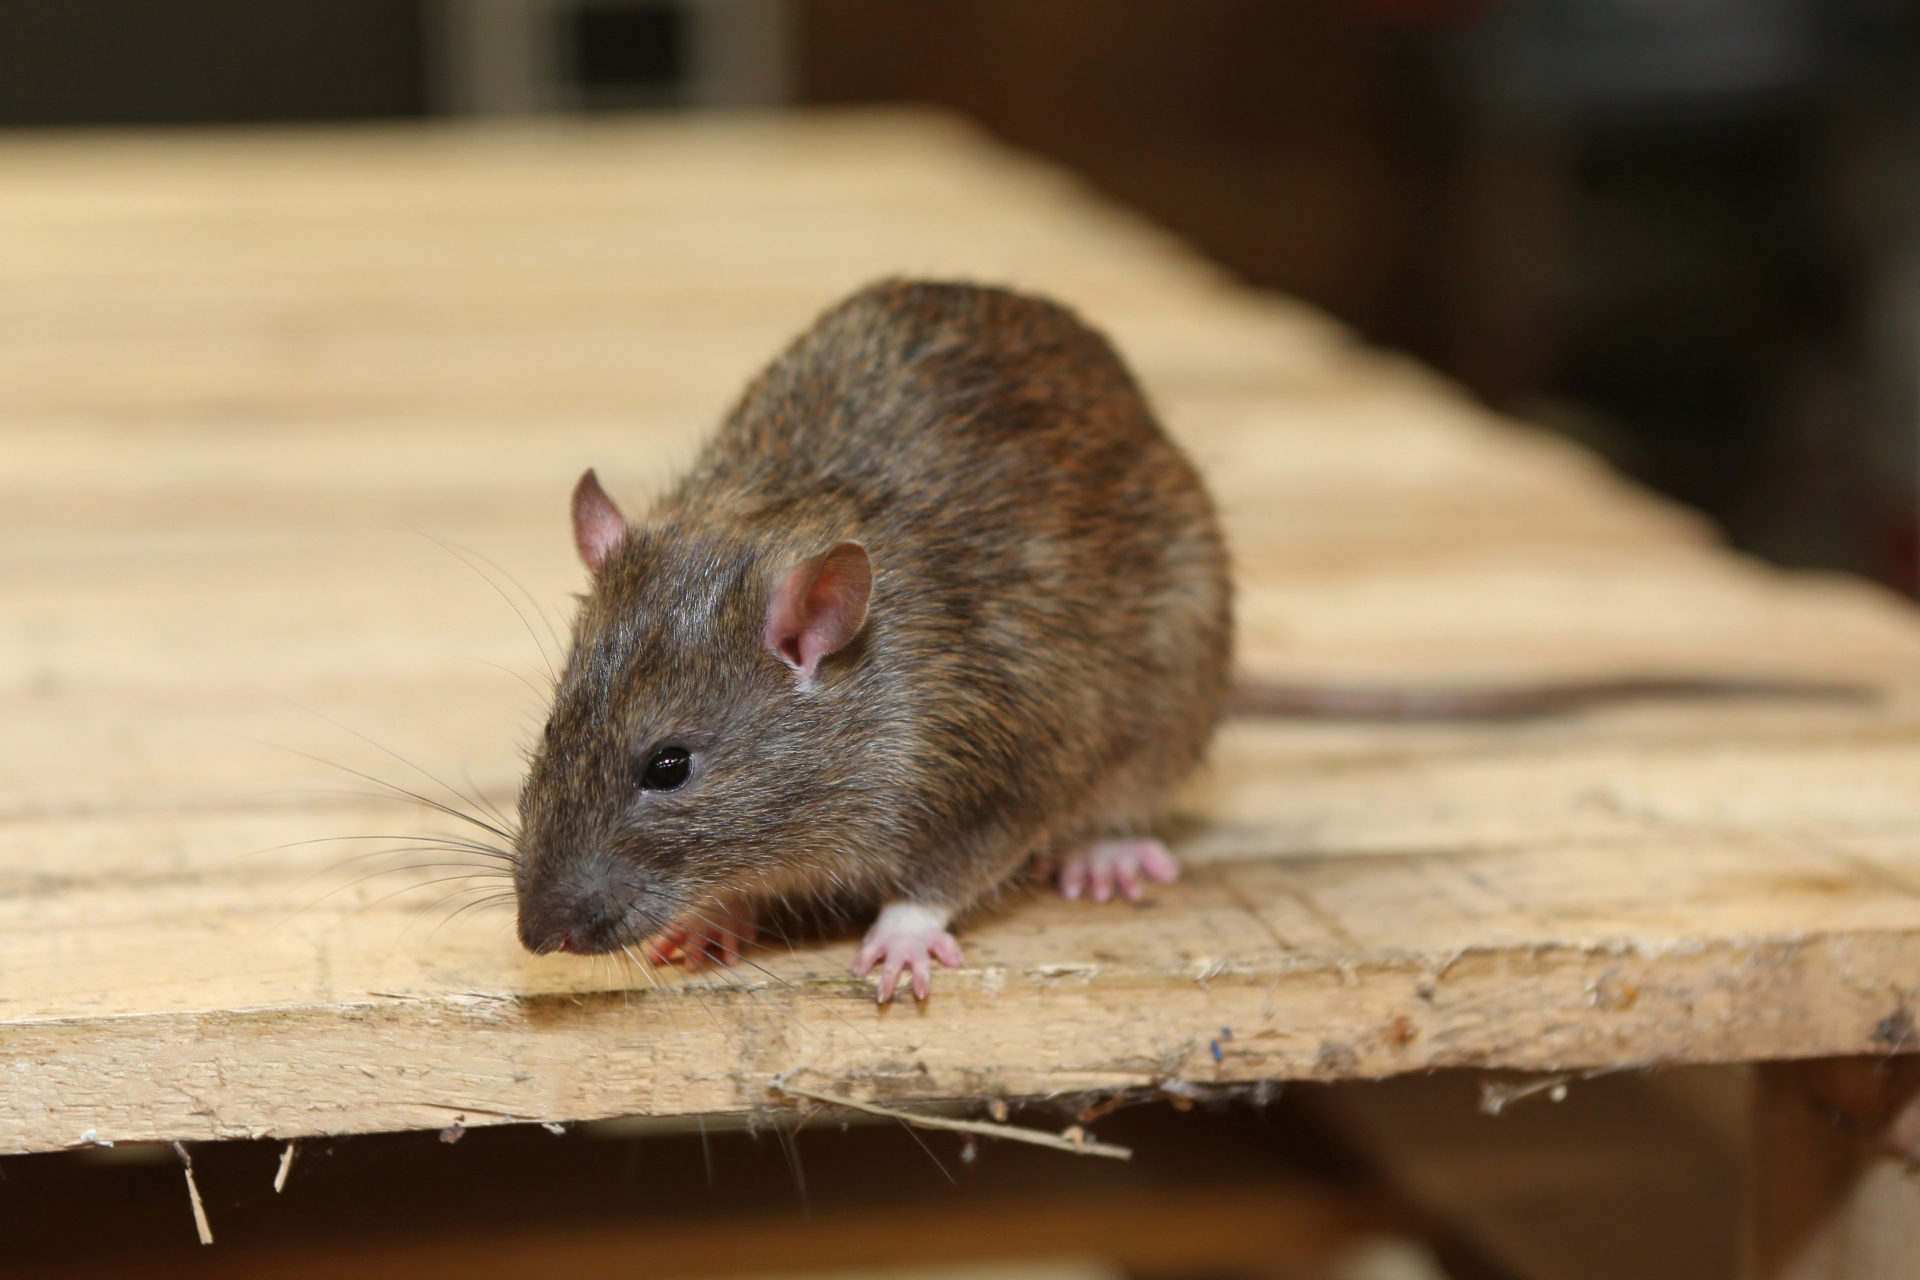 Rat Control, Pest Control in Ewell, Stoneleigh, KT17. Call Now 020 8166 9746